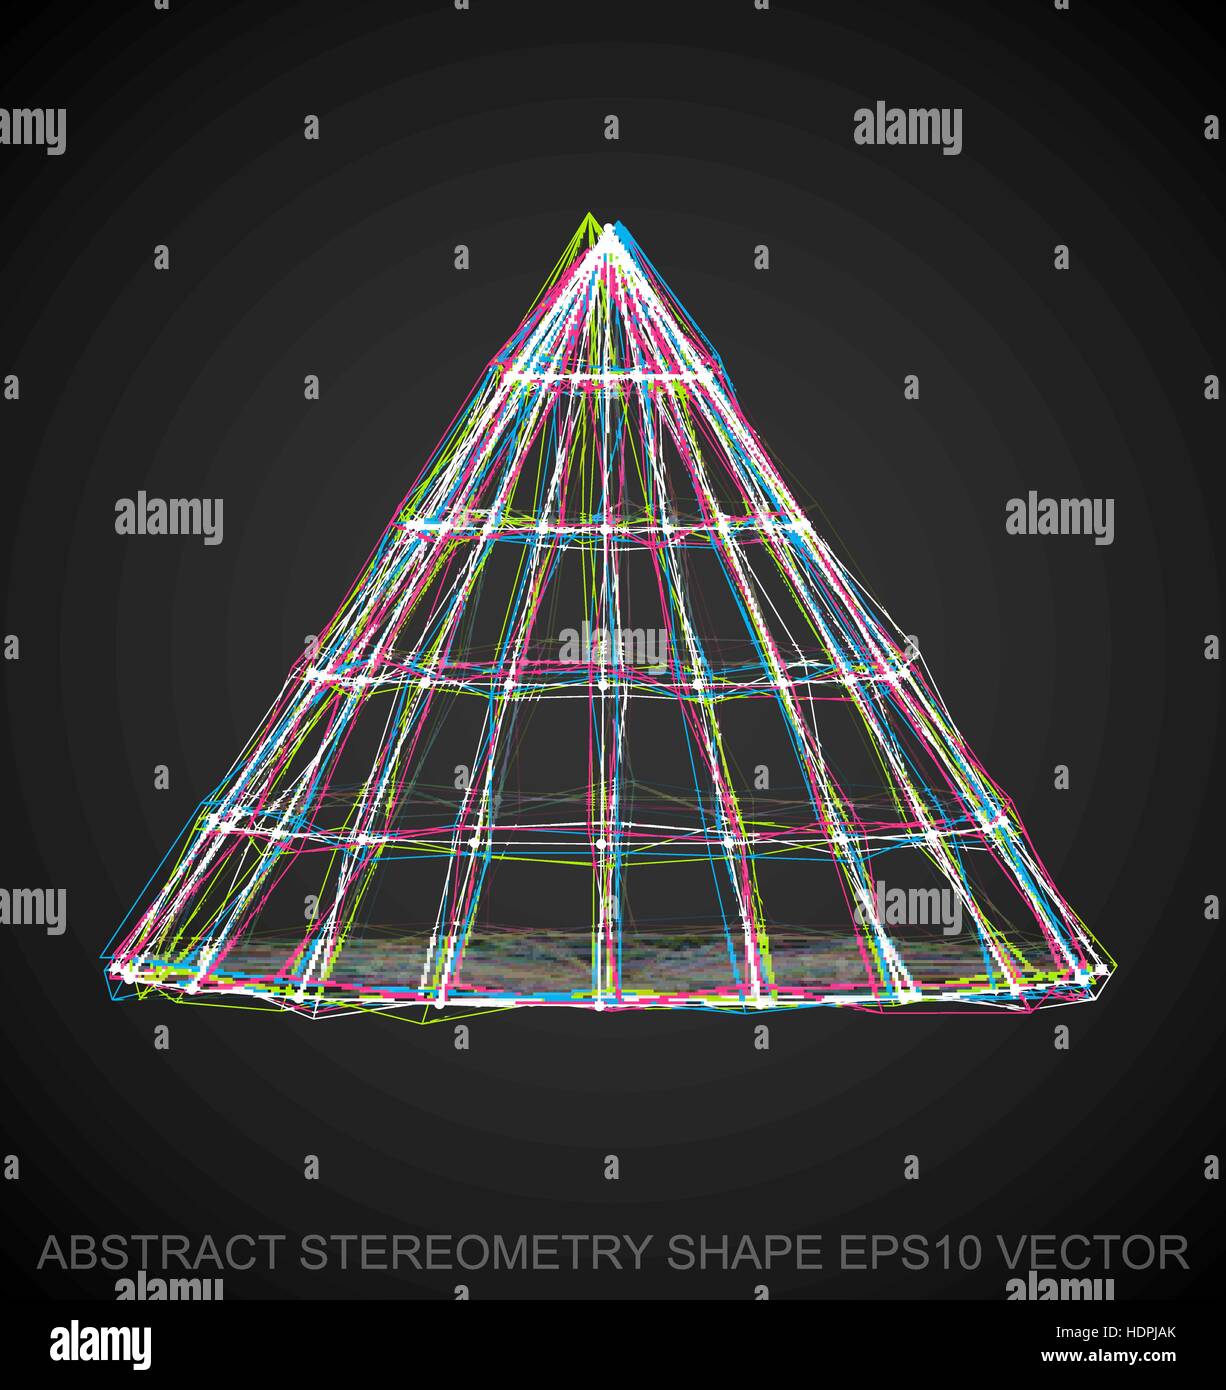 Abstract stereometry shape: Multicolor sketched Cone with Transparent ...